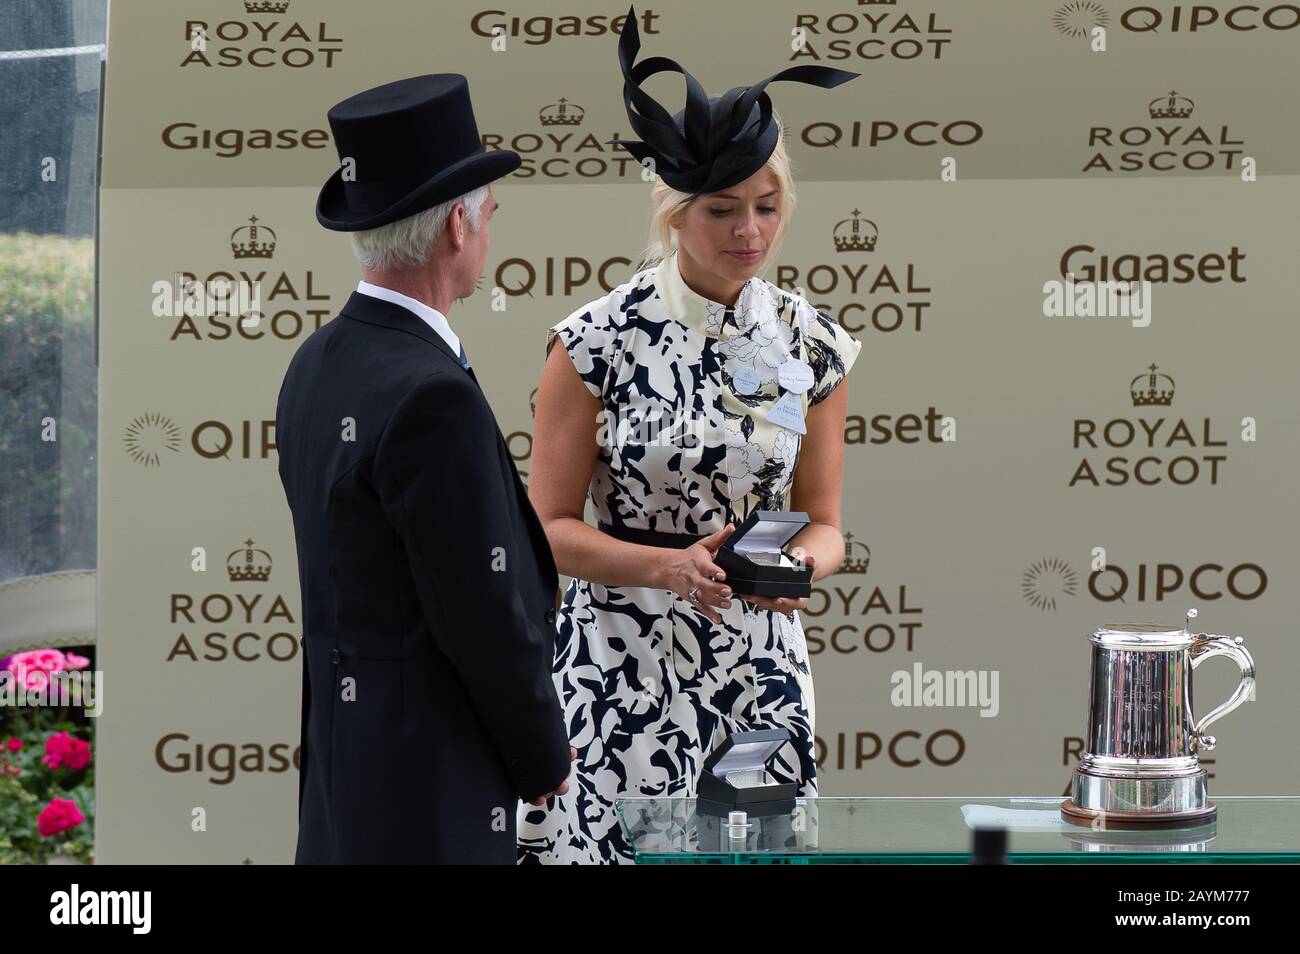 Day Four, Royal Ascot, Ascot, Berkshire, UK. 23rd June, 2017. ITV This Morning Television presenters Phillip Schofield and Holly Willoughby present the winning owners and trainers  of the King Edward VII Stakes with their prizes. The race was won by jockey Adam Kirby on horse Permian. Credit: Maureen McLean/Alamy Stock Photo